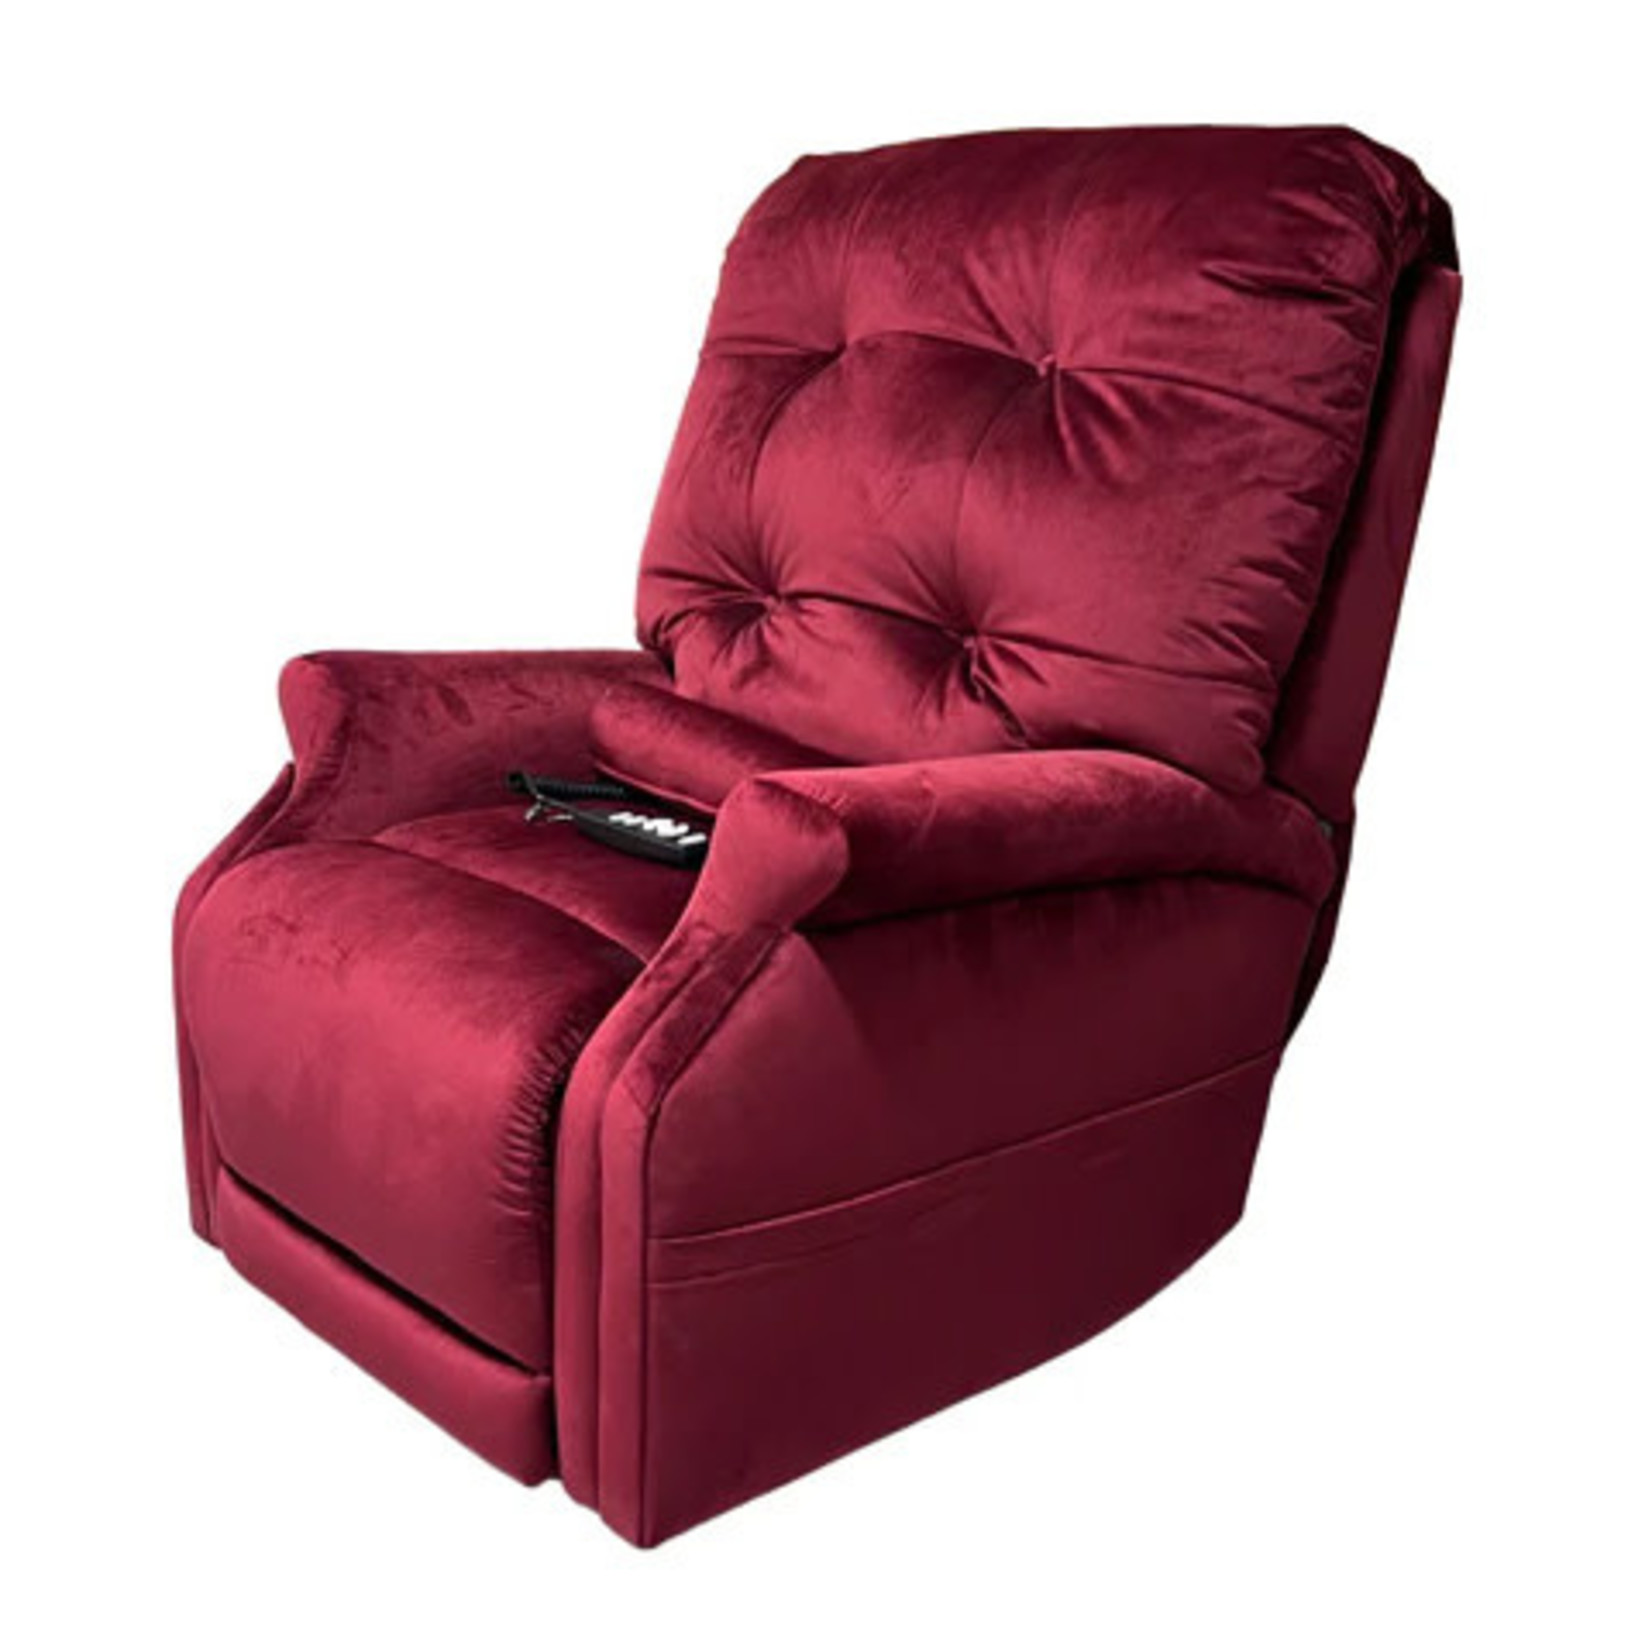 Comfort: Exploring the Benefits of a Sleep Chair Recliners插图3